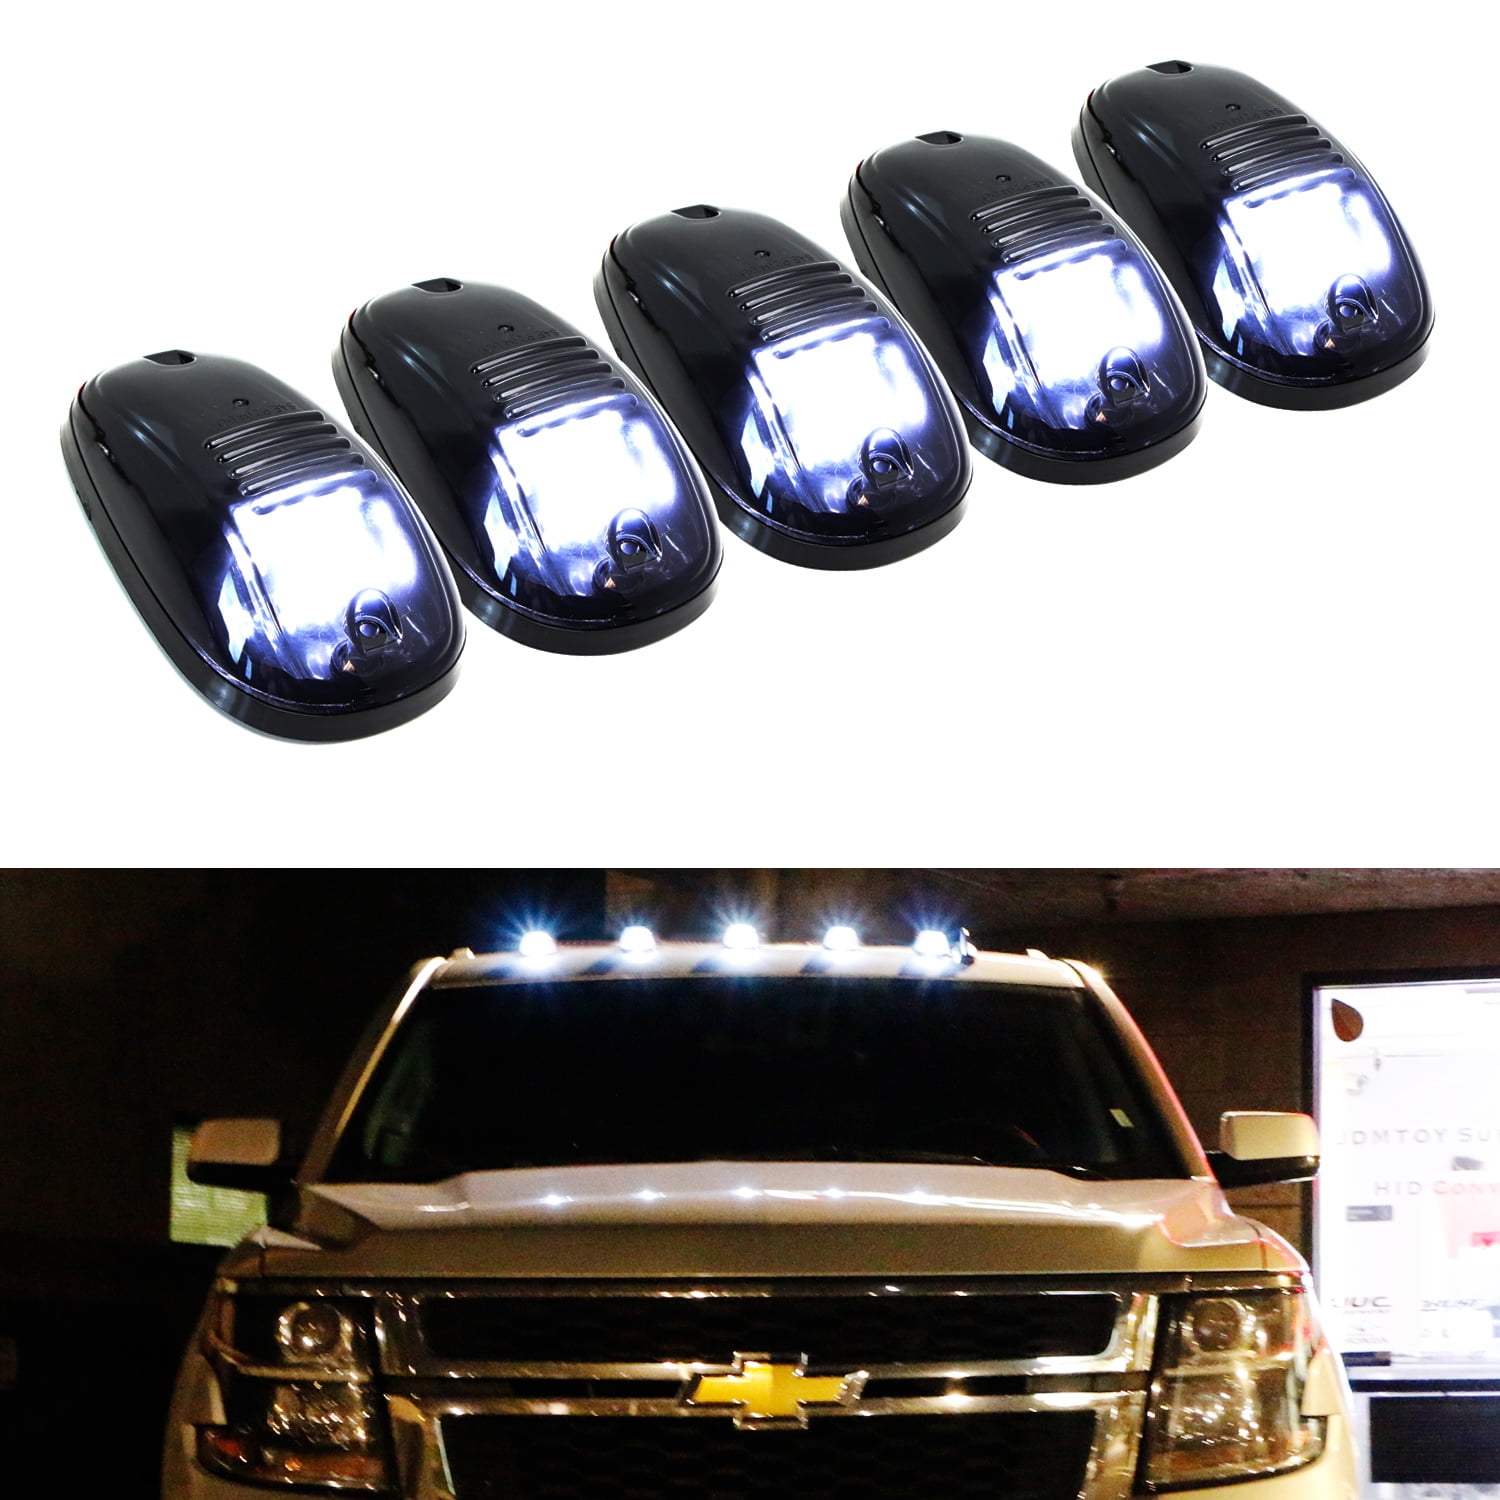 CAB LIGHTS-102 KOMAS Roof Top Lamp Clearance Running Light Replacement 5pcs Black Smoked Lens 16 LED Cab Roof Marker Lights Switch Harness Kit for Truck SUV 2003-2016 Dodge Ram 1500 2500 3500 4500 16 Amber LED